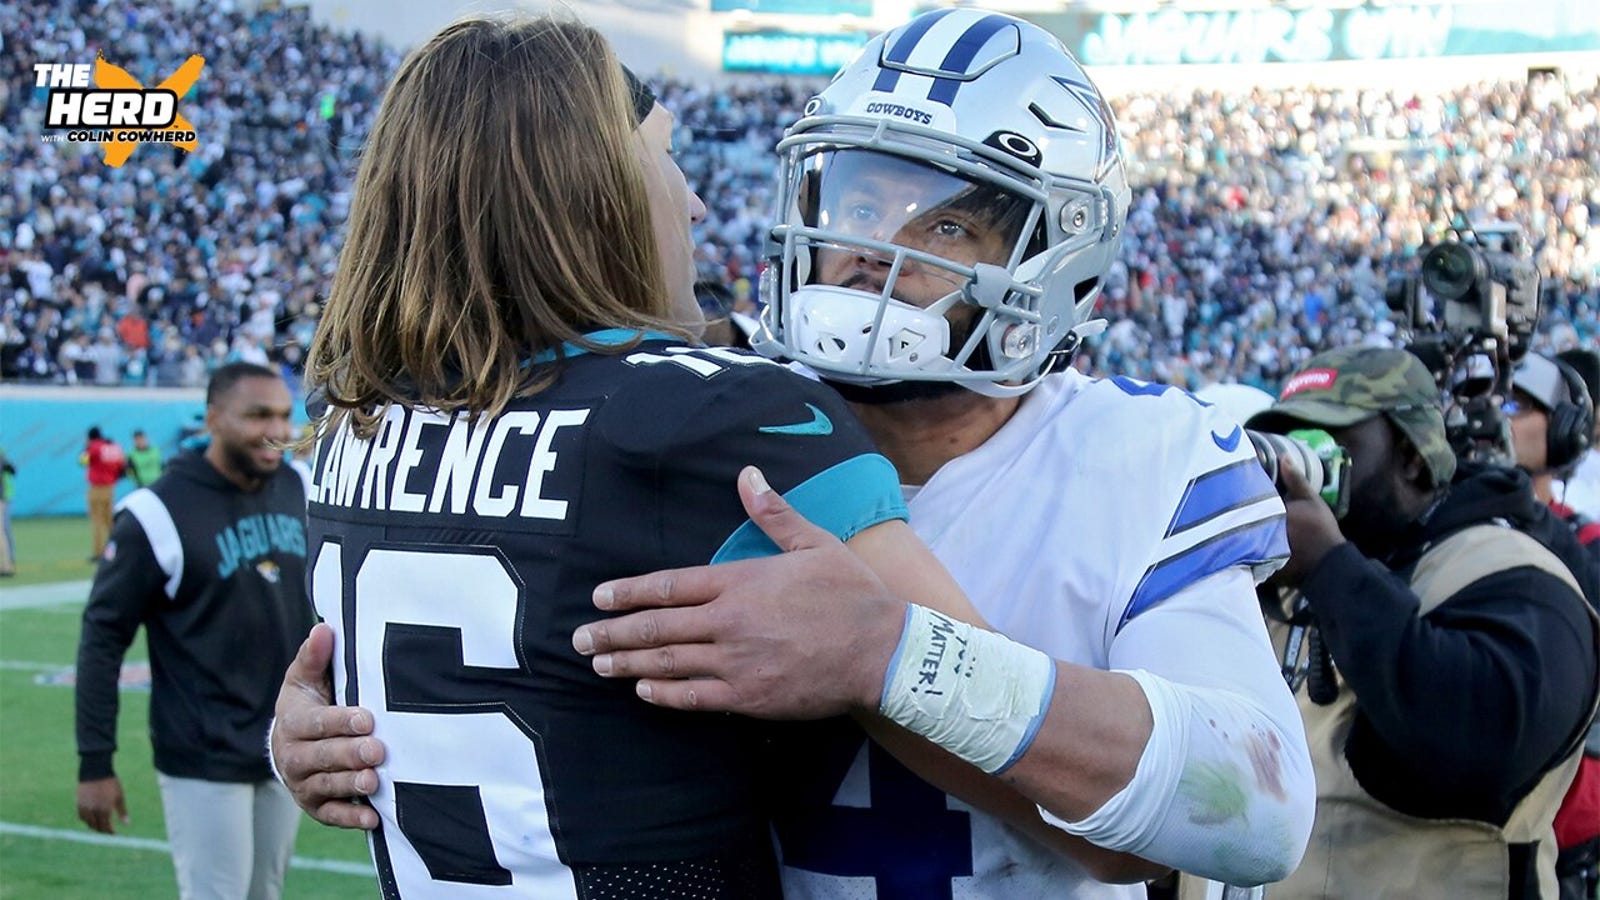 Why Trevor Lawrence, Jaguars is the real story in OT win vs. Cowboys